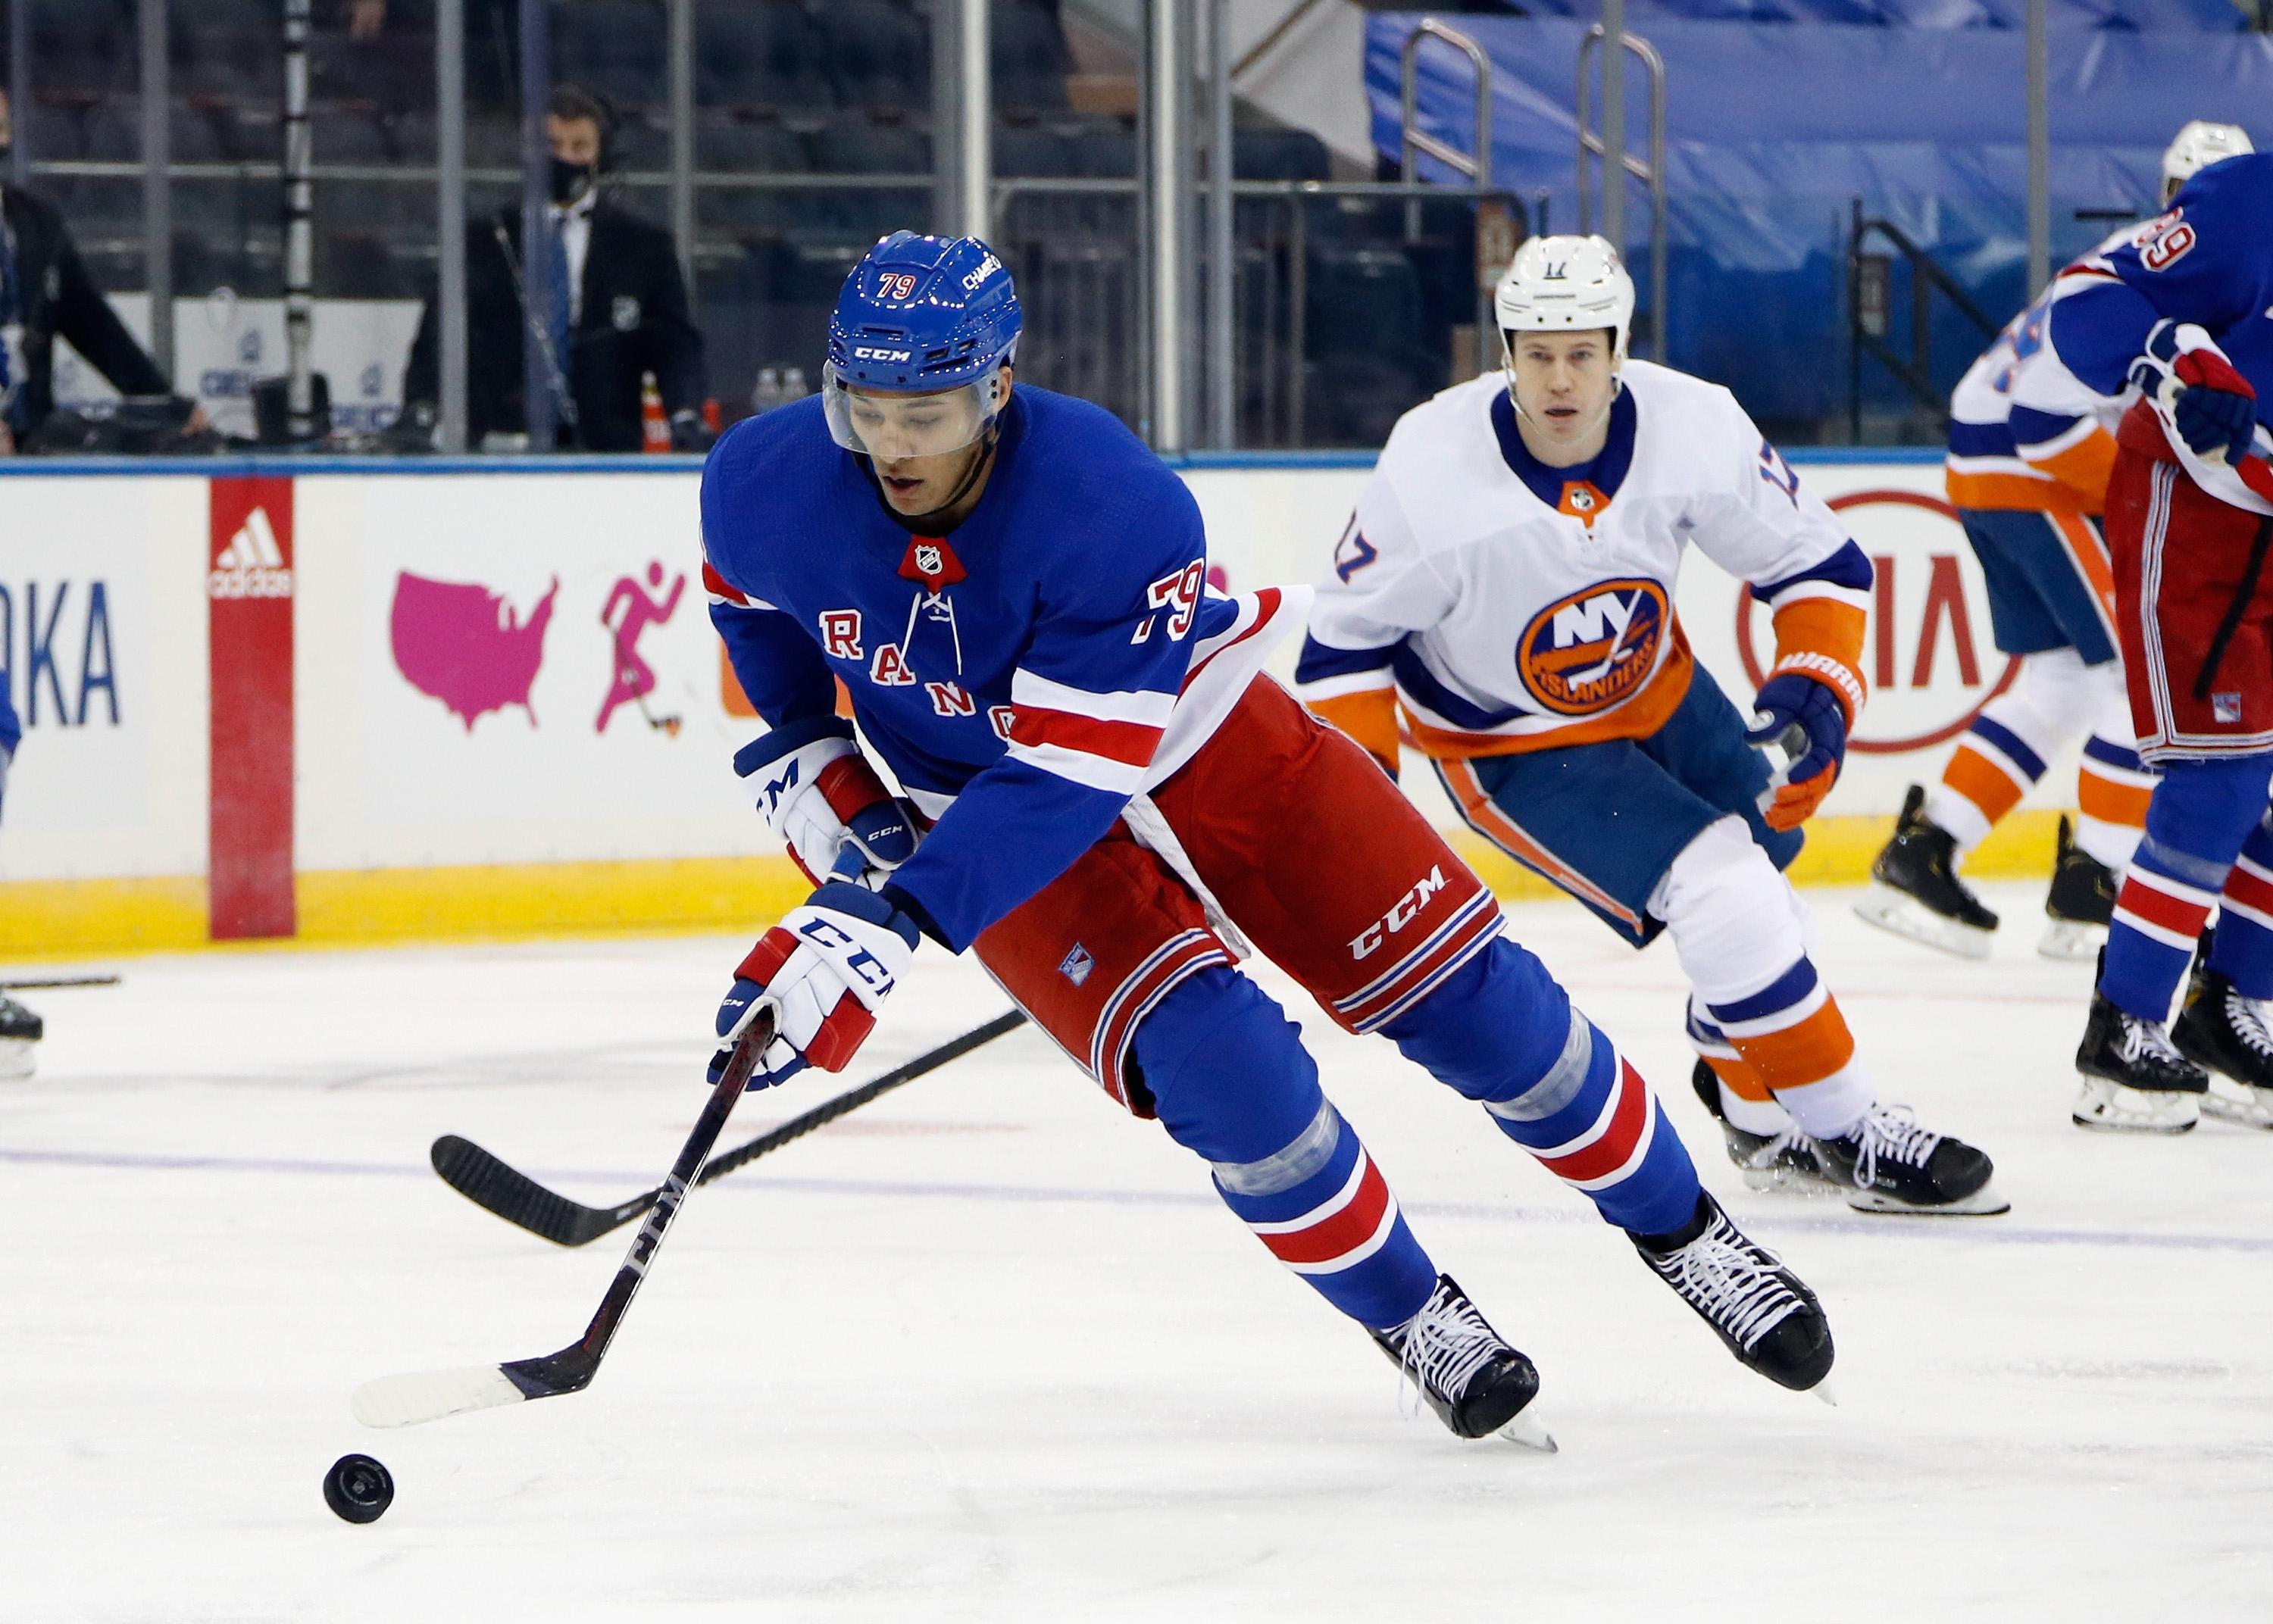 Jan 14, 2021; New York, NY, USA; New York Rangers defenseman K'Andre Miller (79) skates with the puck against the New York Islanders at Madison Square Garden. / © Pool Photo-USA TODAY Sports